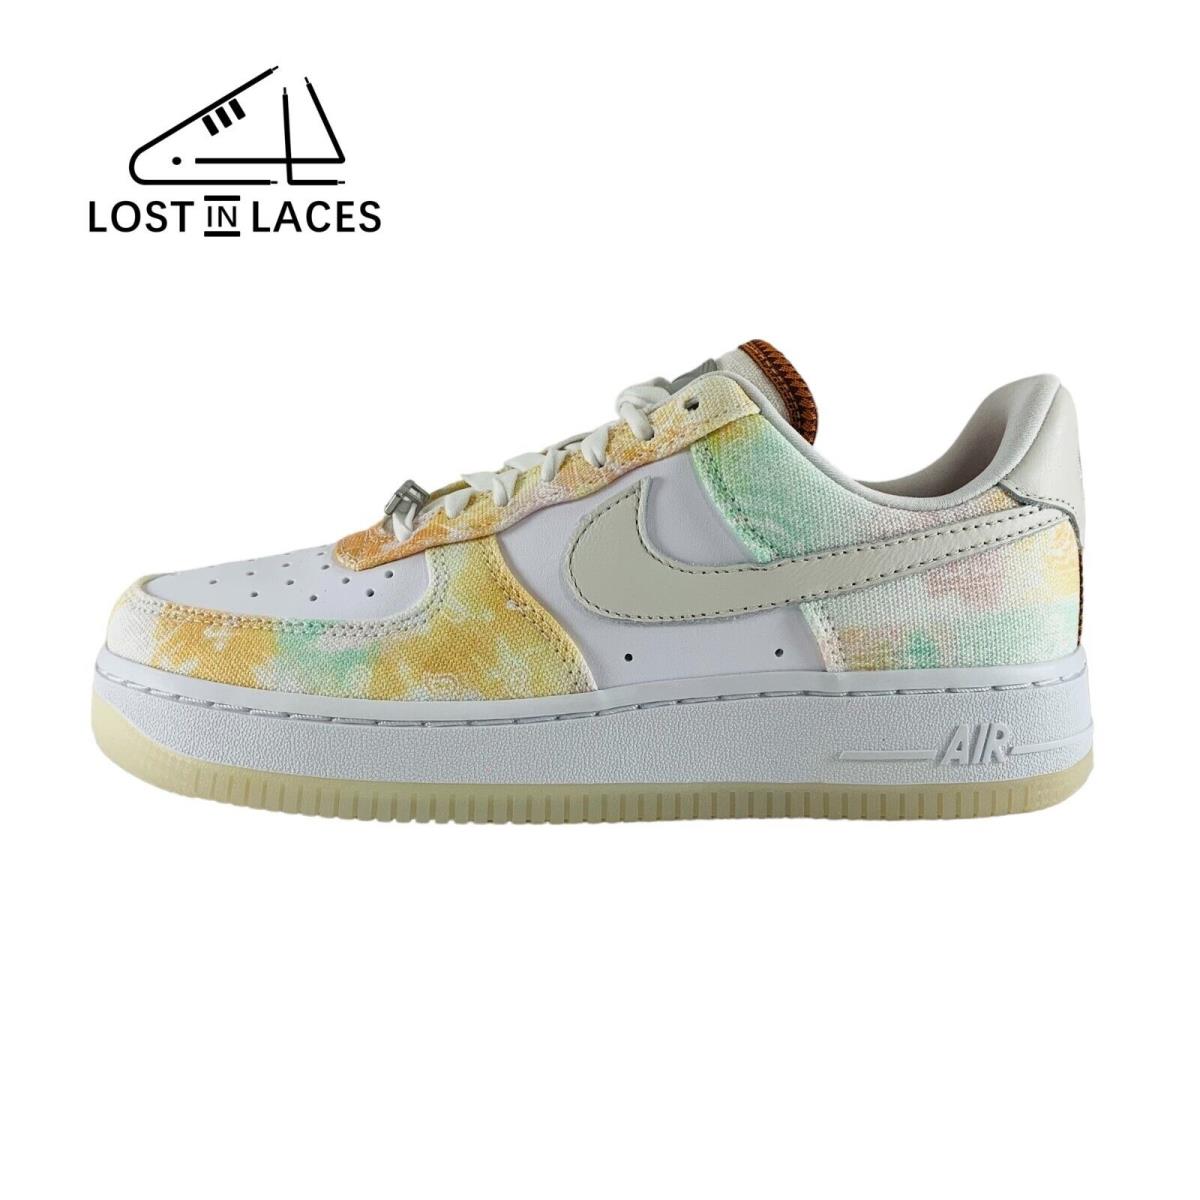 Nike Air Force 1 `07 LX Pastel Paisley Sneakers Shoes Women`s Sizes